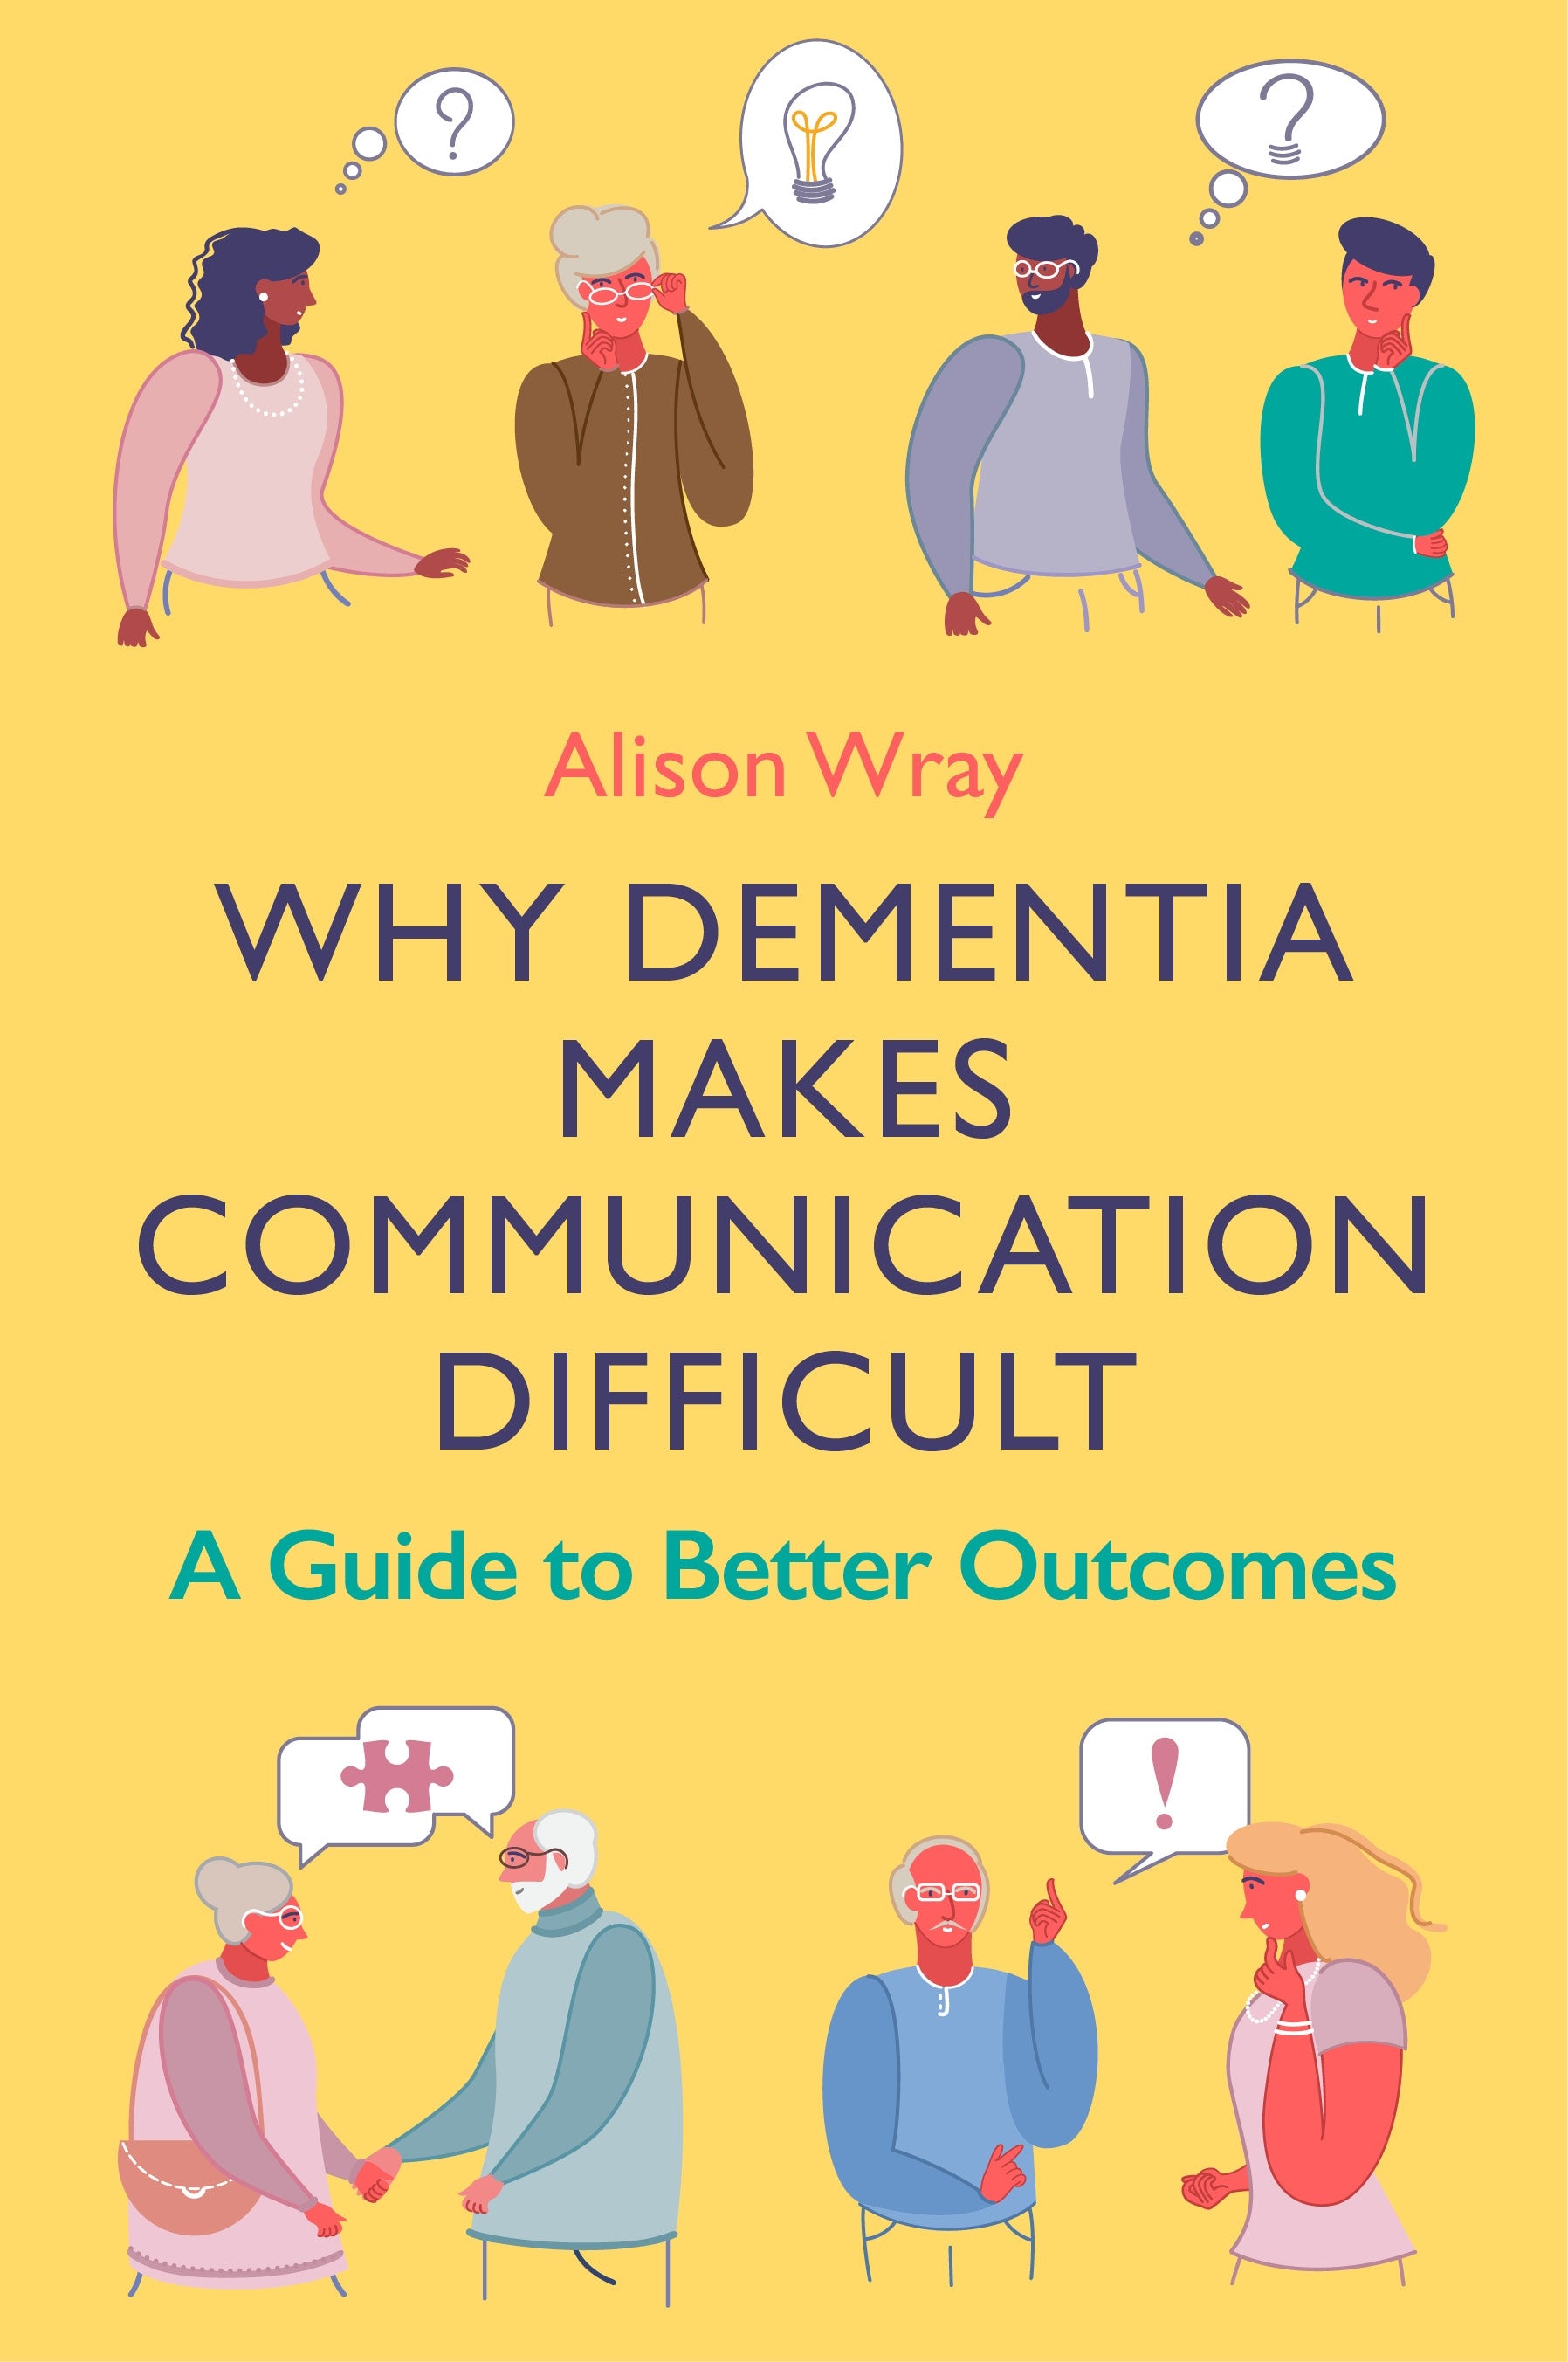 Why Dementia Makes Communication Difficult by Alison Wray